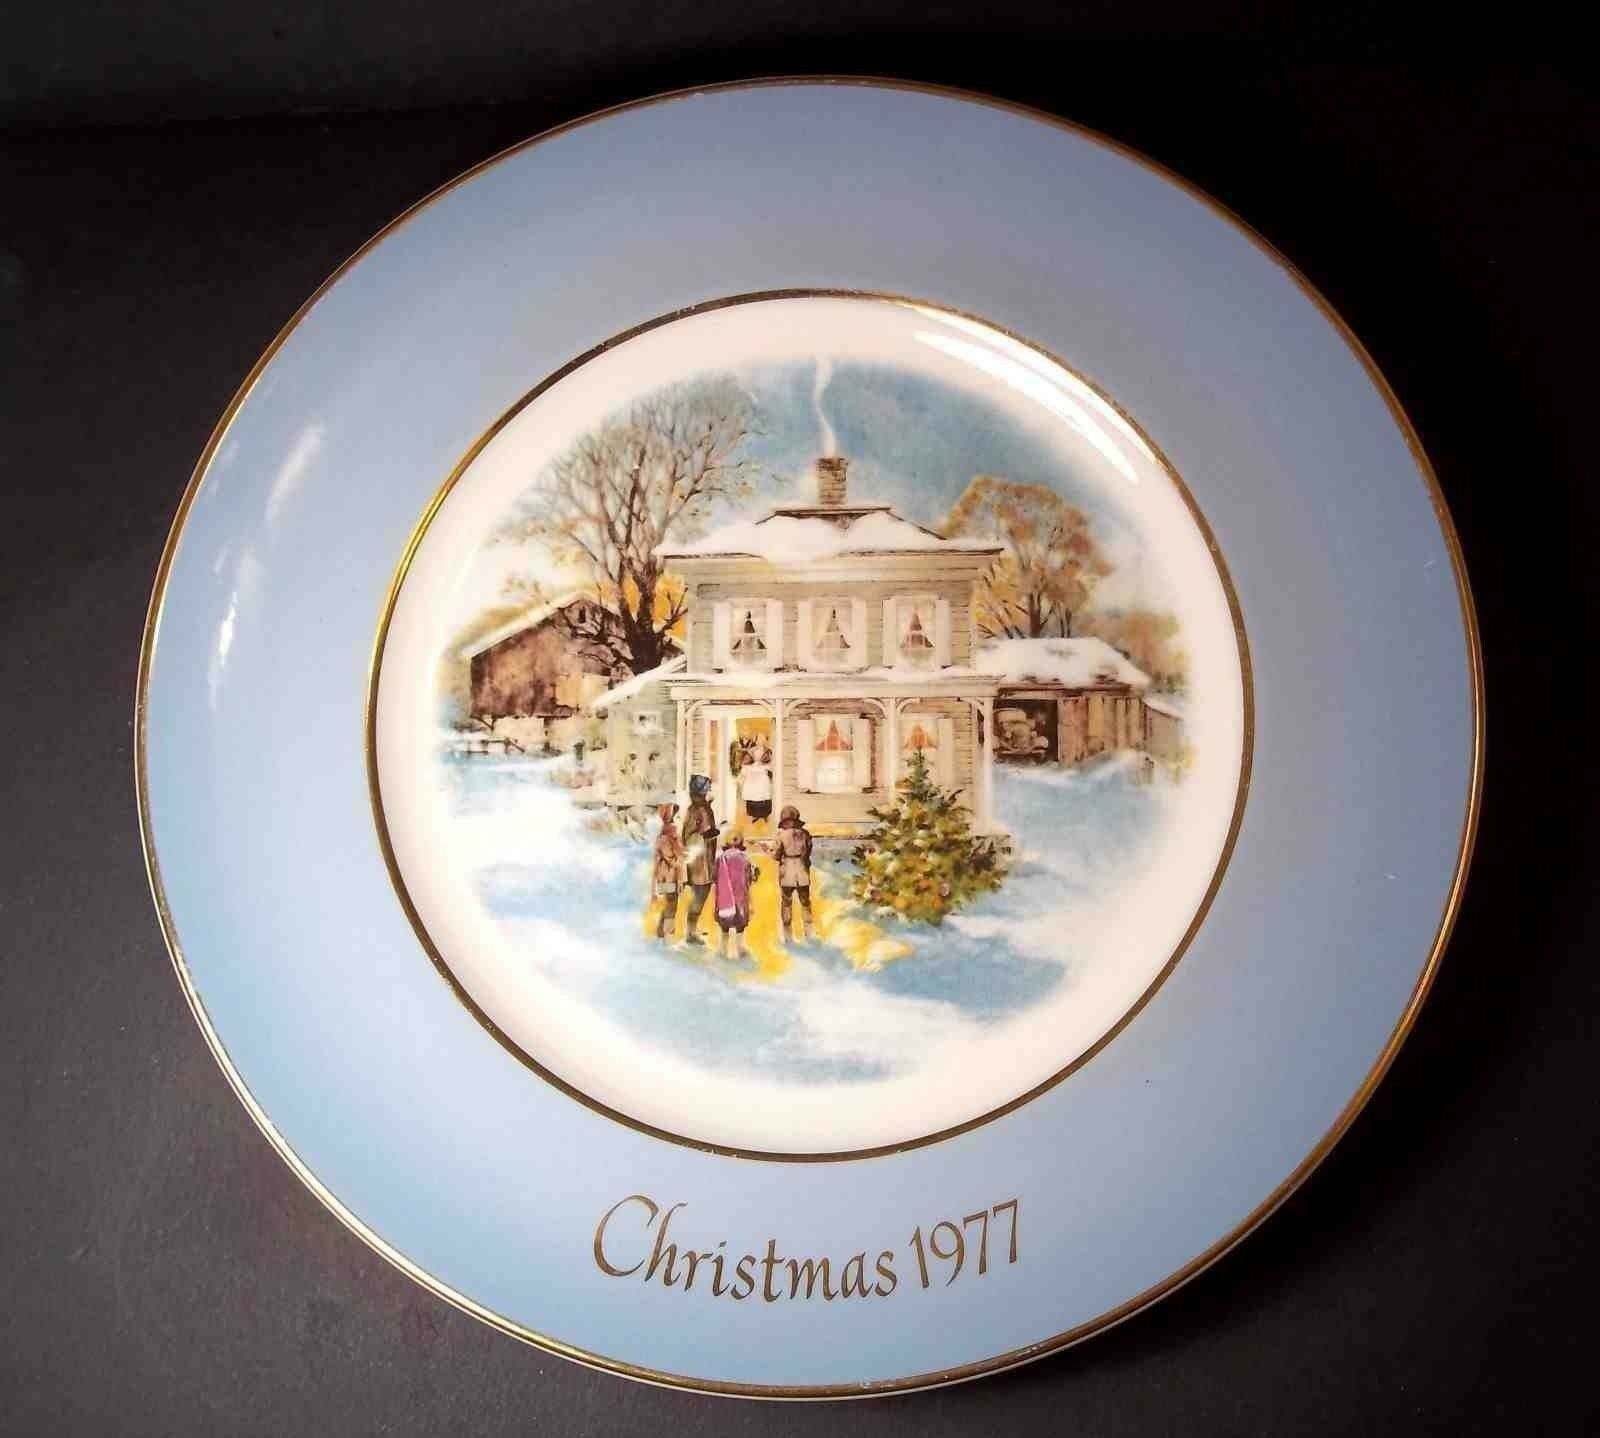 Primary image for Avon Christmas plate Carolers in the Snow 1977 Enoch Wedgwood England 8.75"